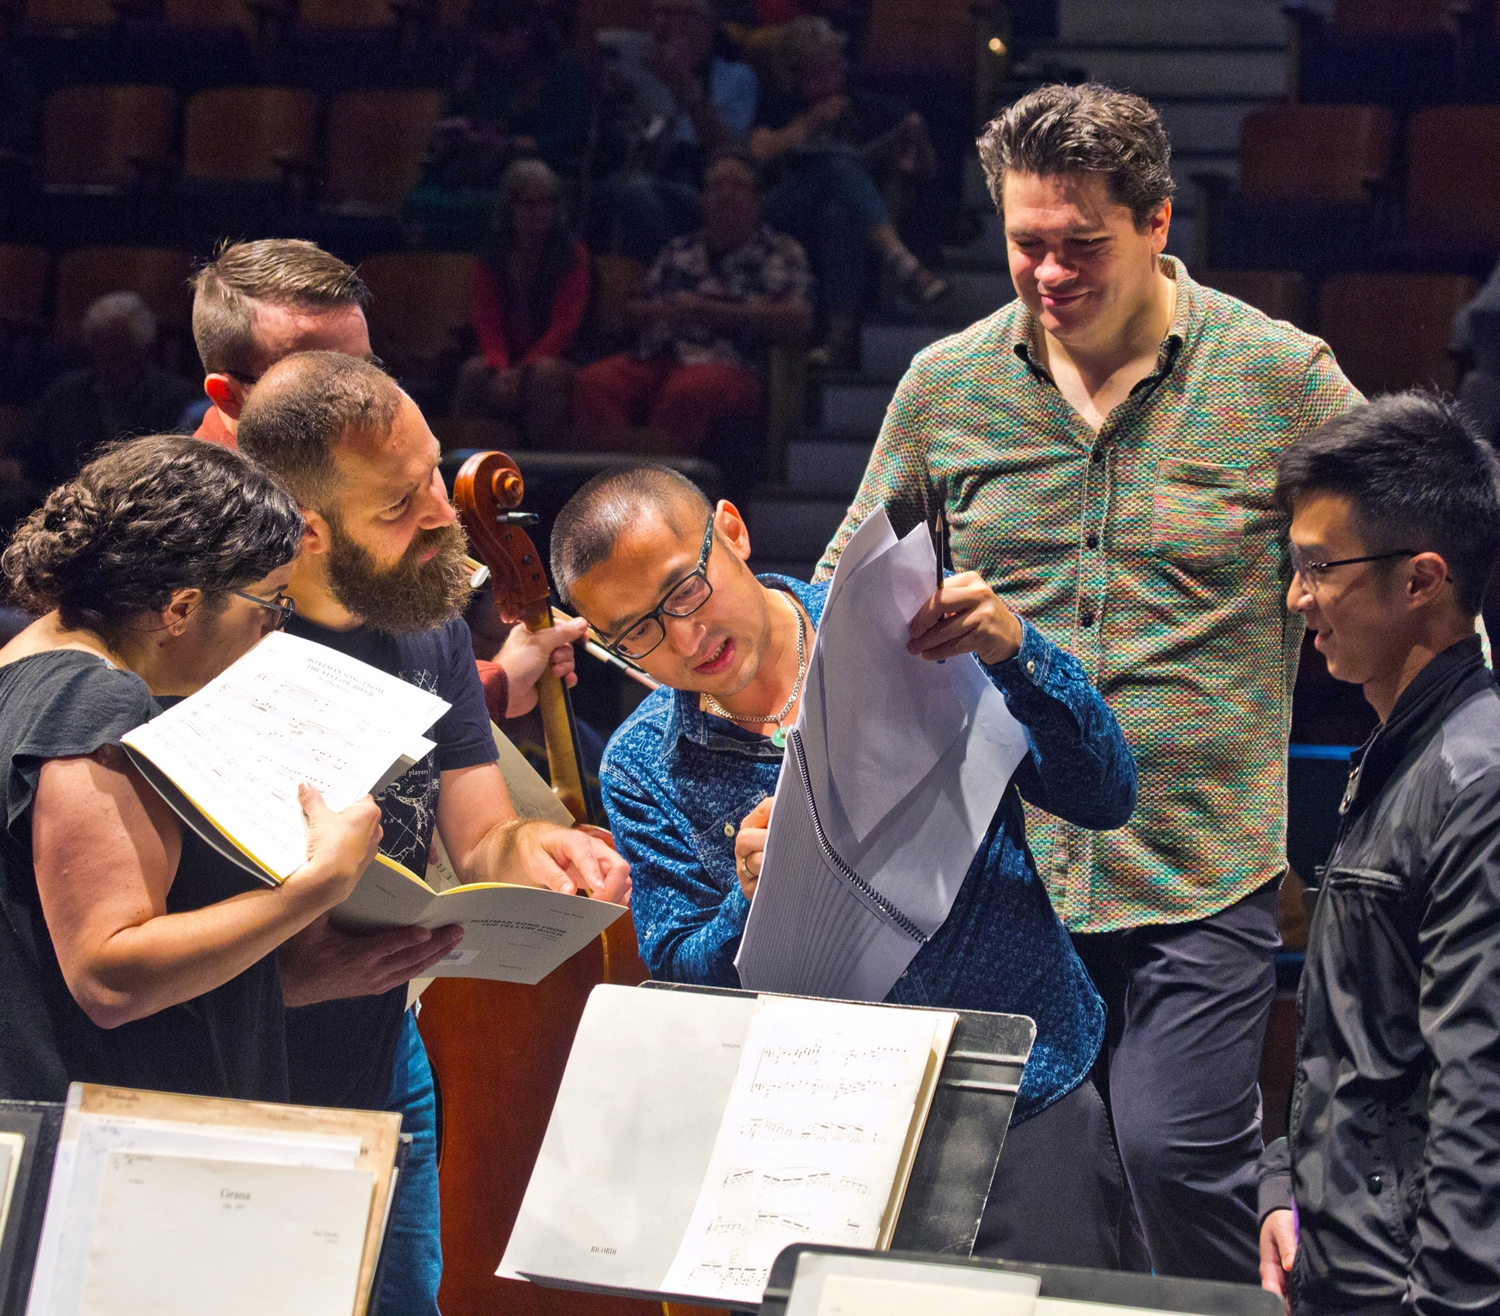 Composer Huang Ruo reviews his score with orchestra players.